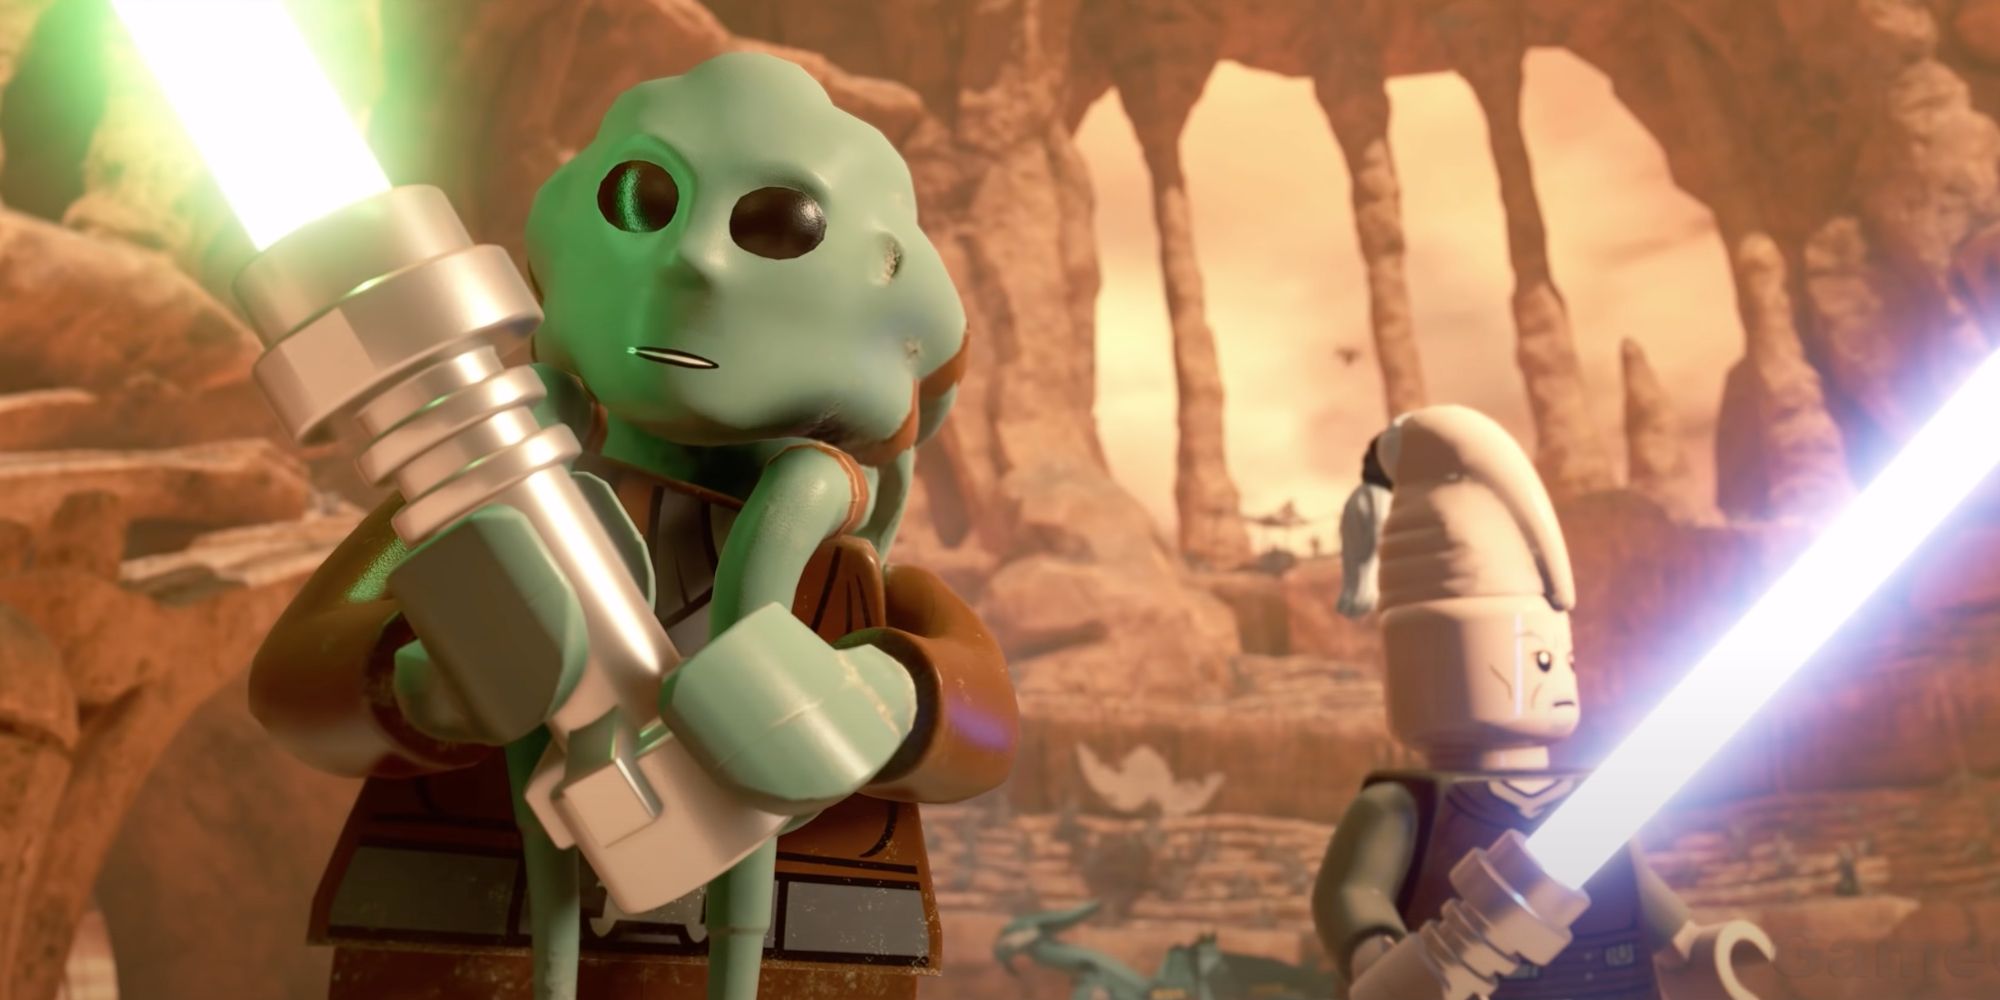 LEGO Star Wars: The Skywalker Saga fixes Attack of the Clones terrible ending by expanding on aspects of the narrative that have galaxy-wide consequences